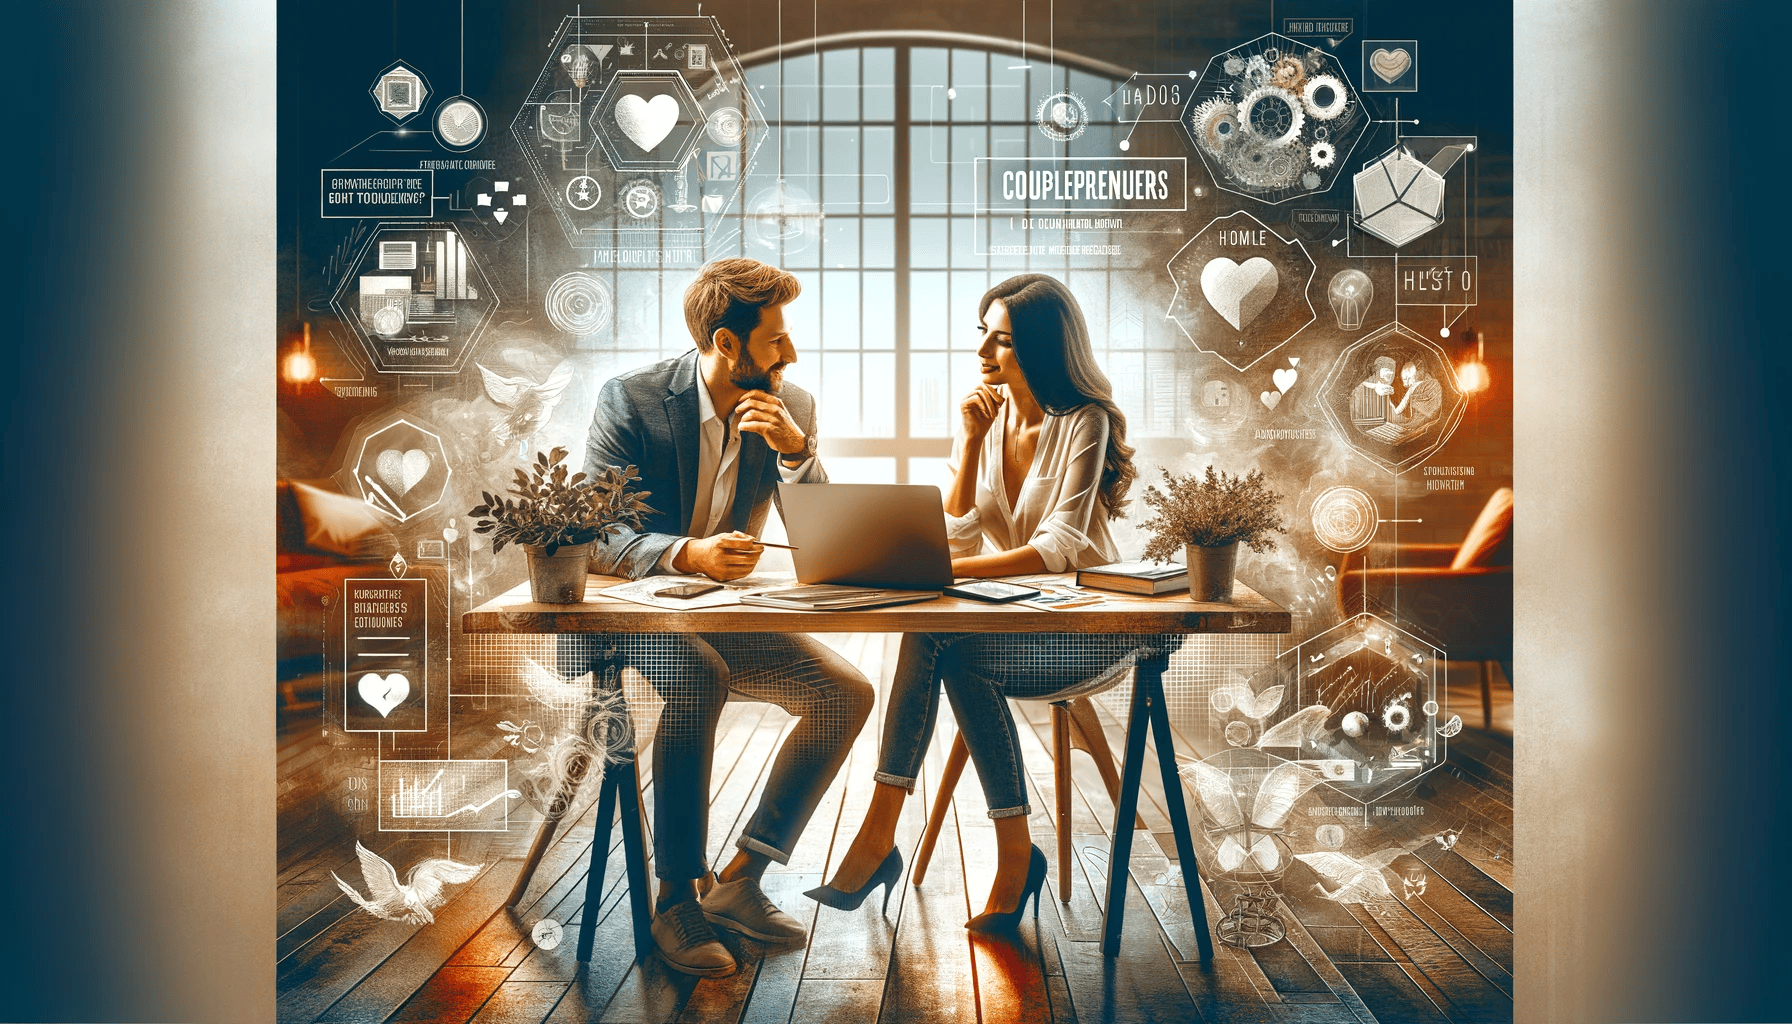 Entrepreneurial couple engaging in business discussion in a hybrid office-home environment, symbolizing the blend of professional collaboration and personal connection inherent in couplepreneurship